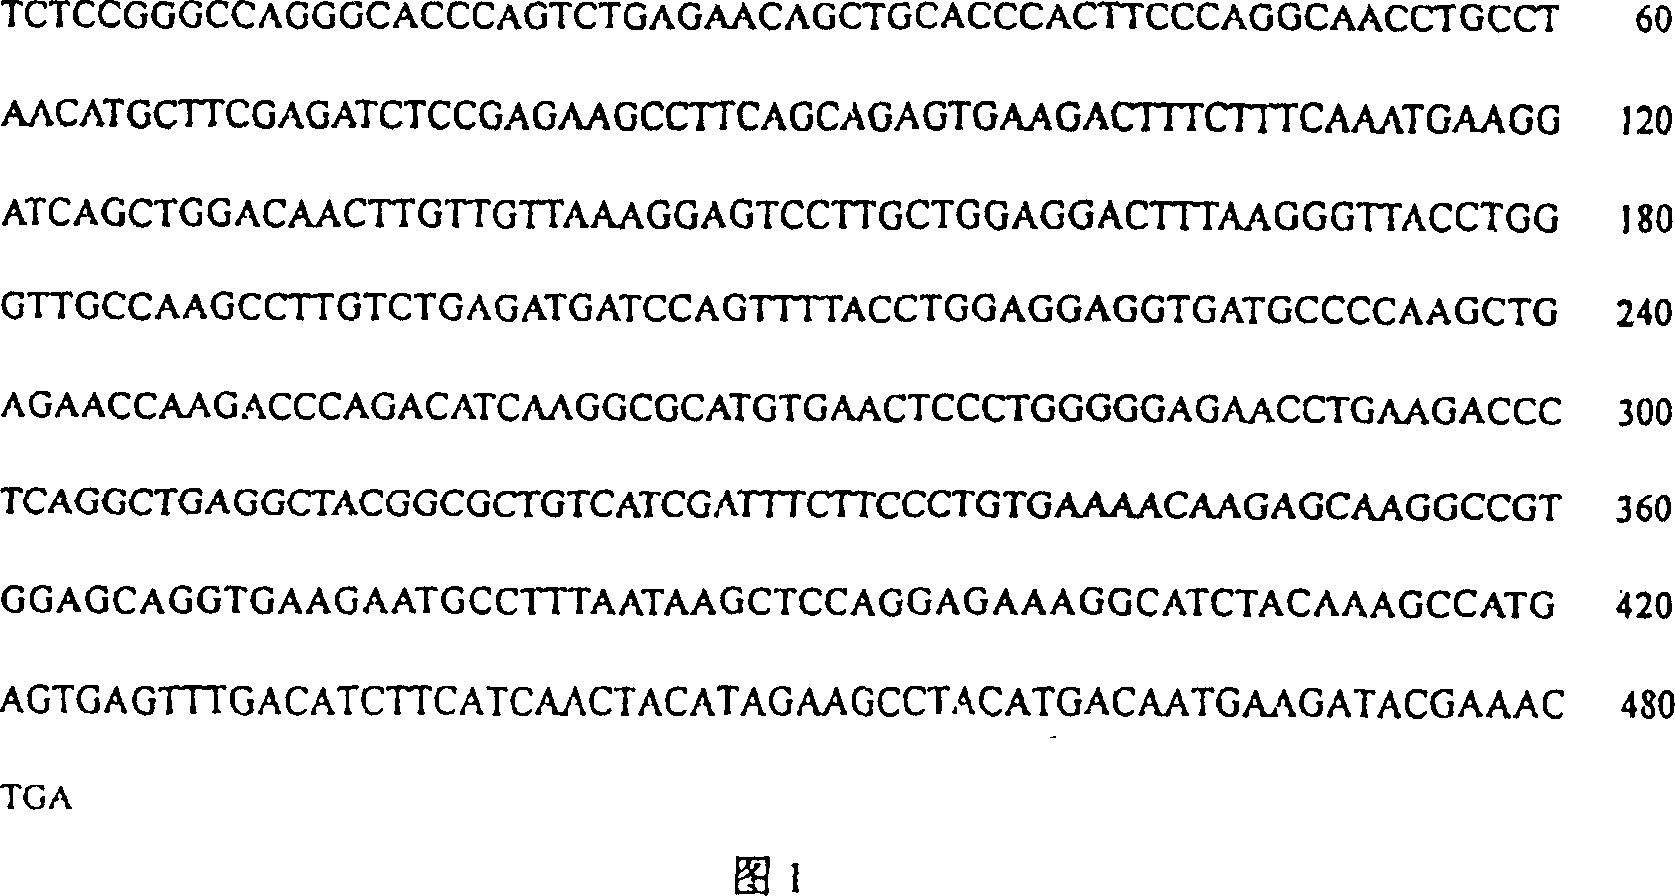 Human interleukin-10 gene sequenc and E coli containing the said gene sequence